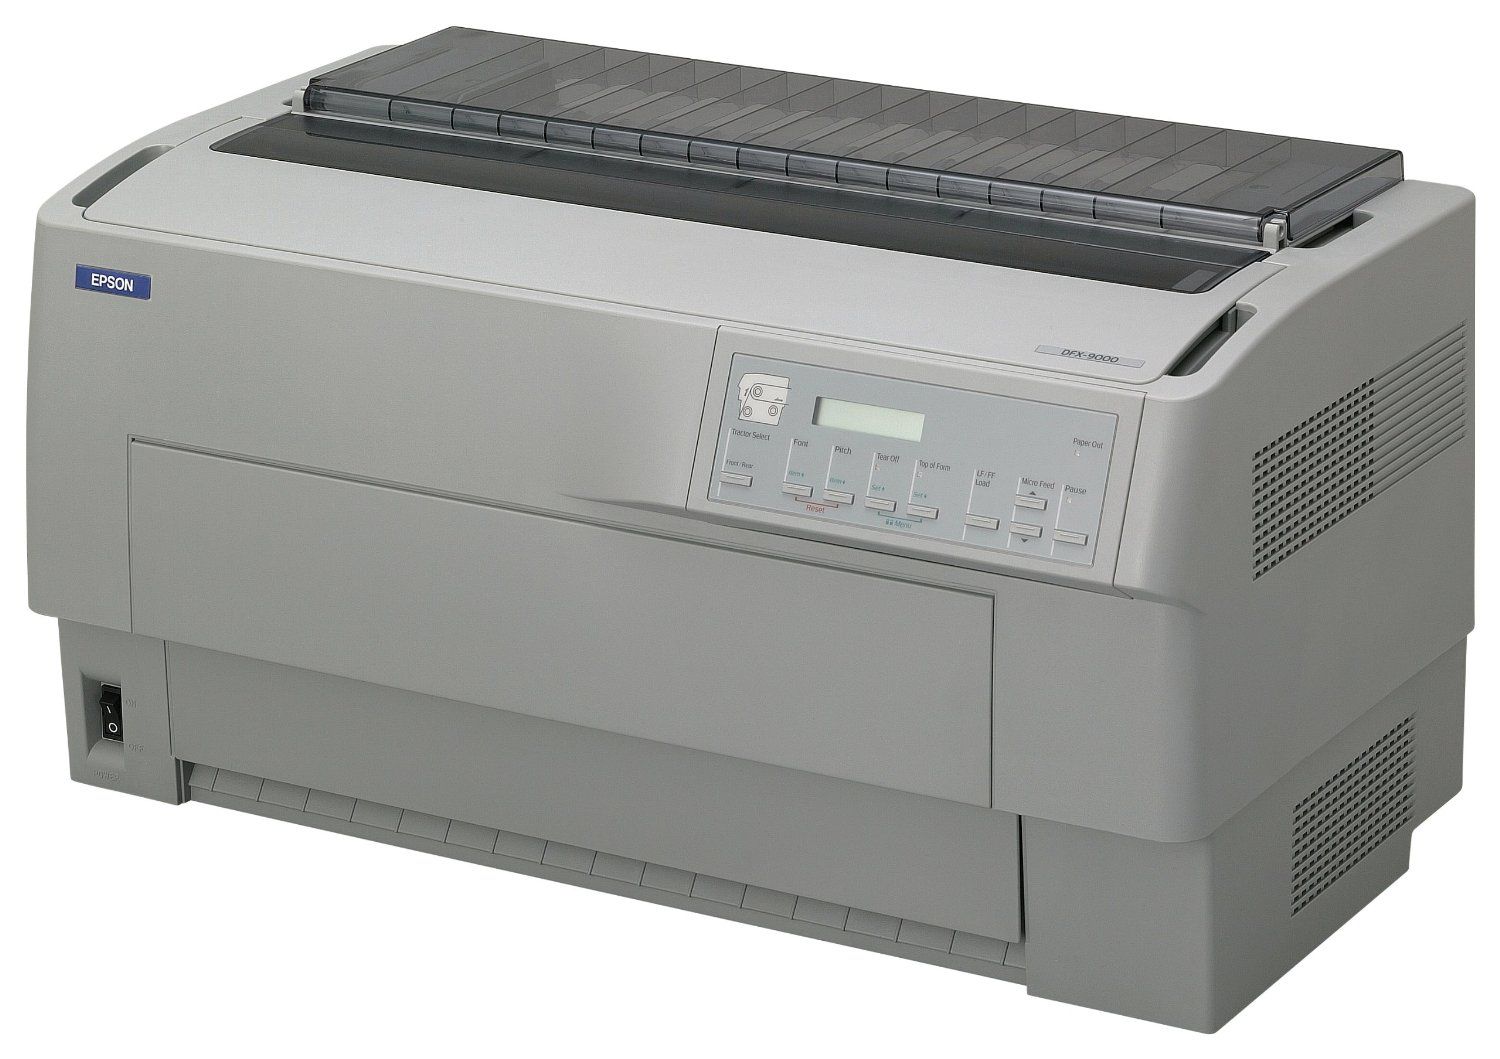 We buy new,used and obsolete dot matrix printers